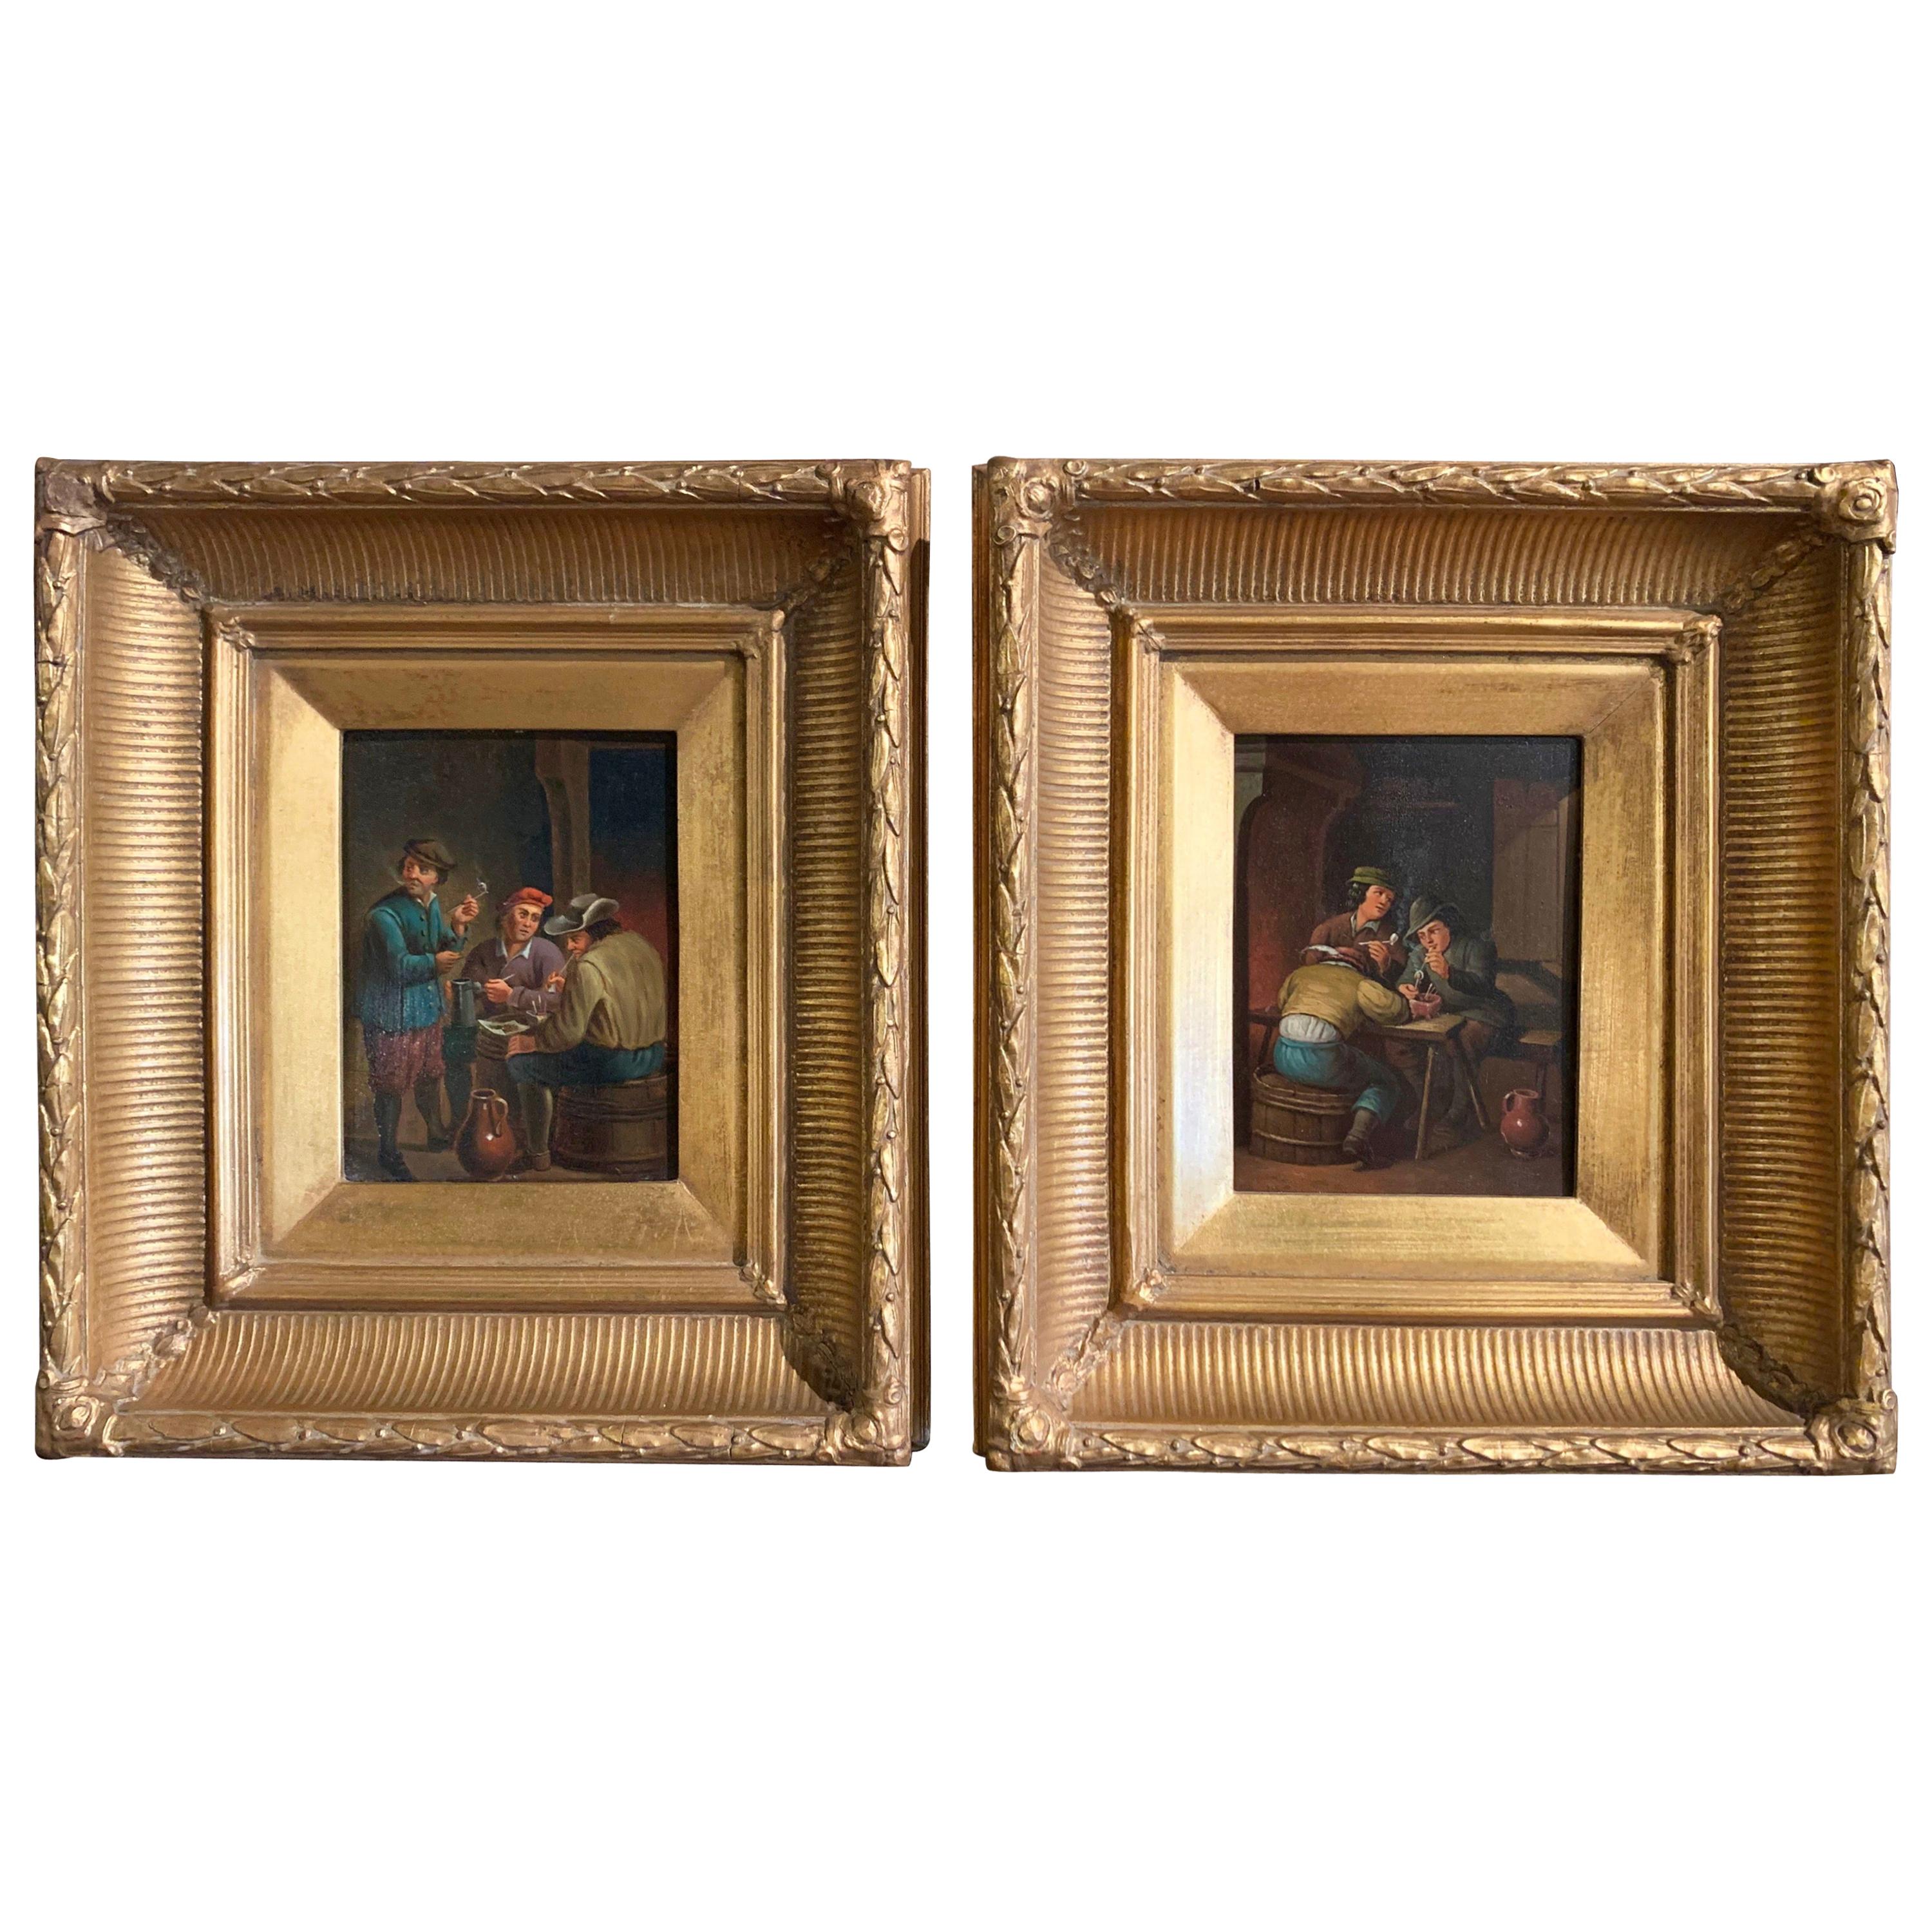 Pair of 19th Century Flemish Oil on Copper Paintings in Gilt Frame after Teniers